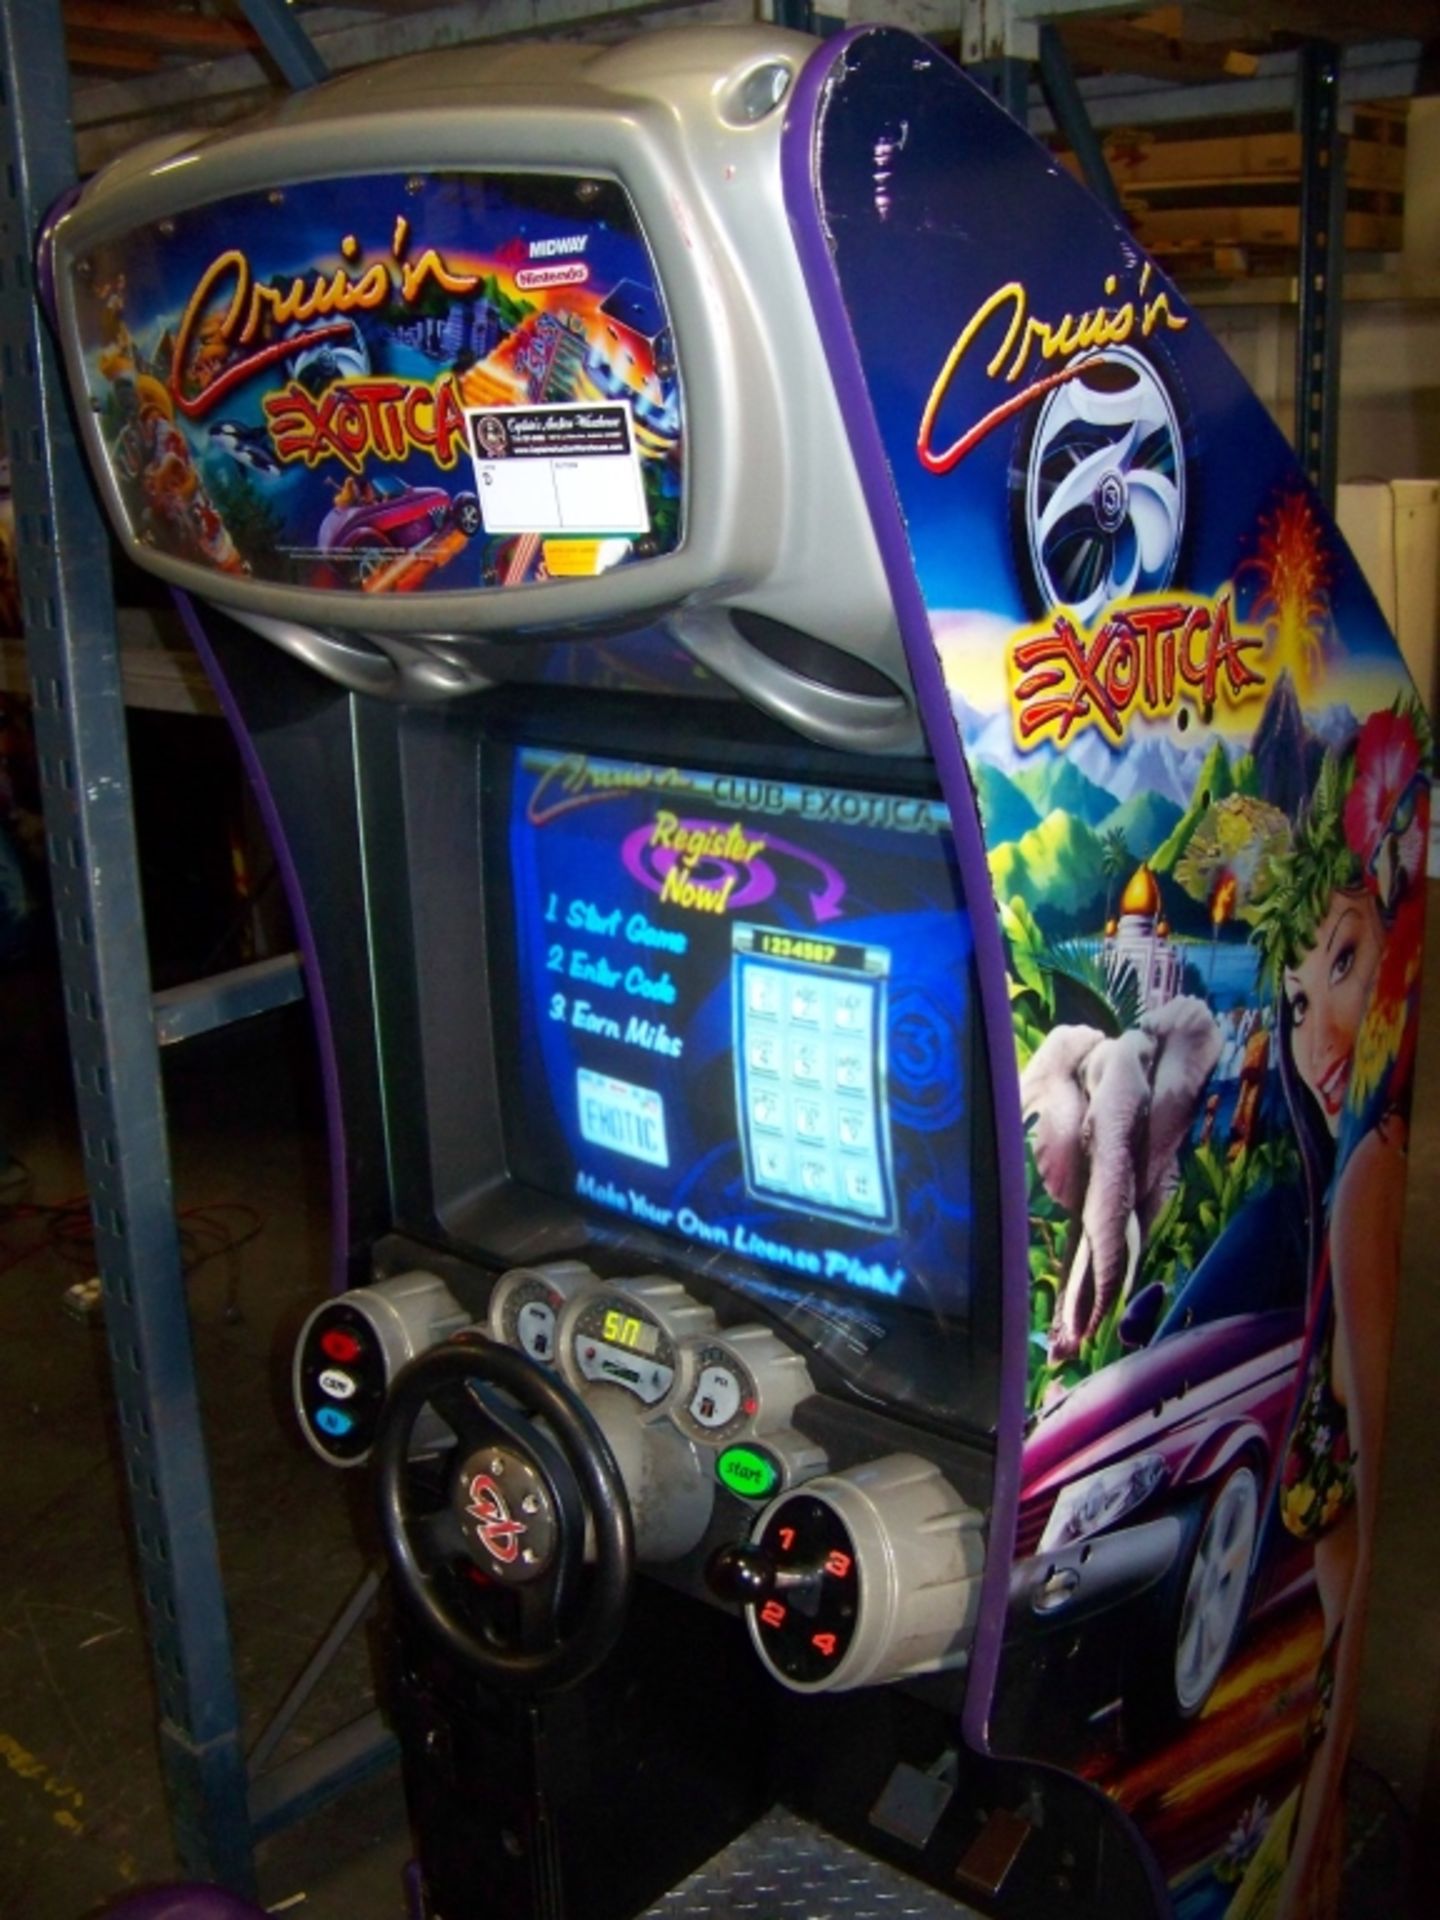 CRUISIN EXOTICA SITDOWN DRIVER ARCADE GAME MIDWAY - Image 5 of 5